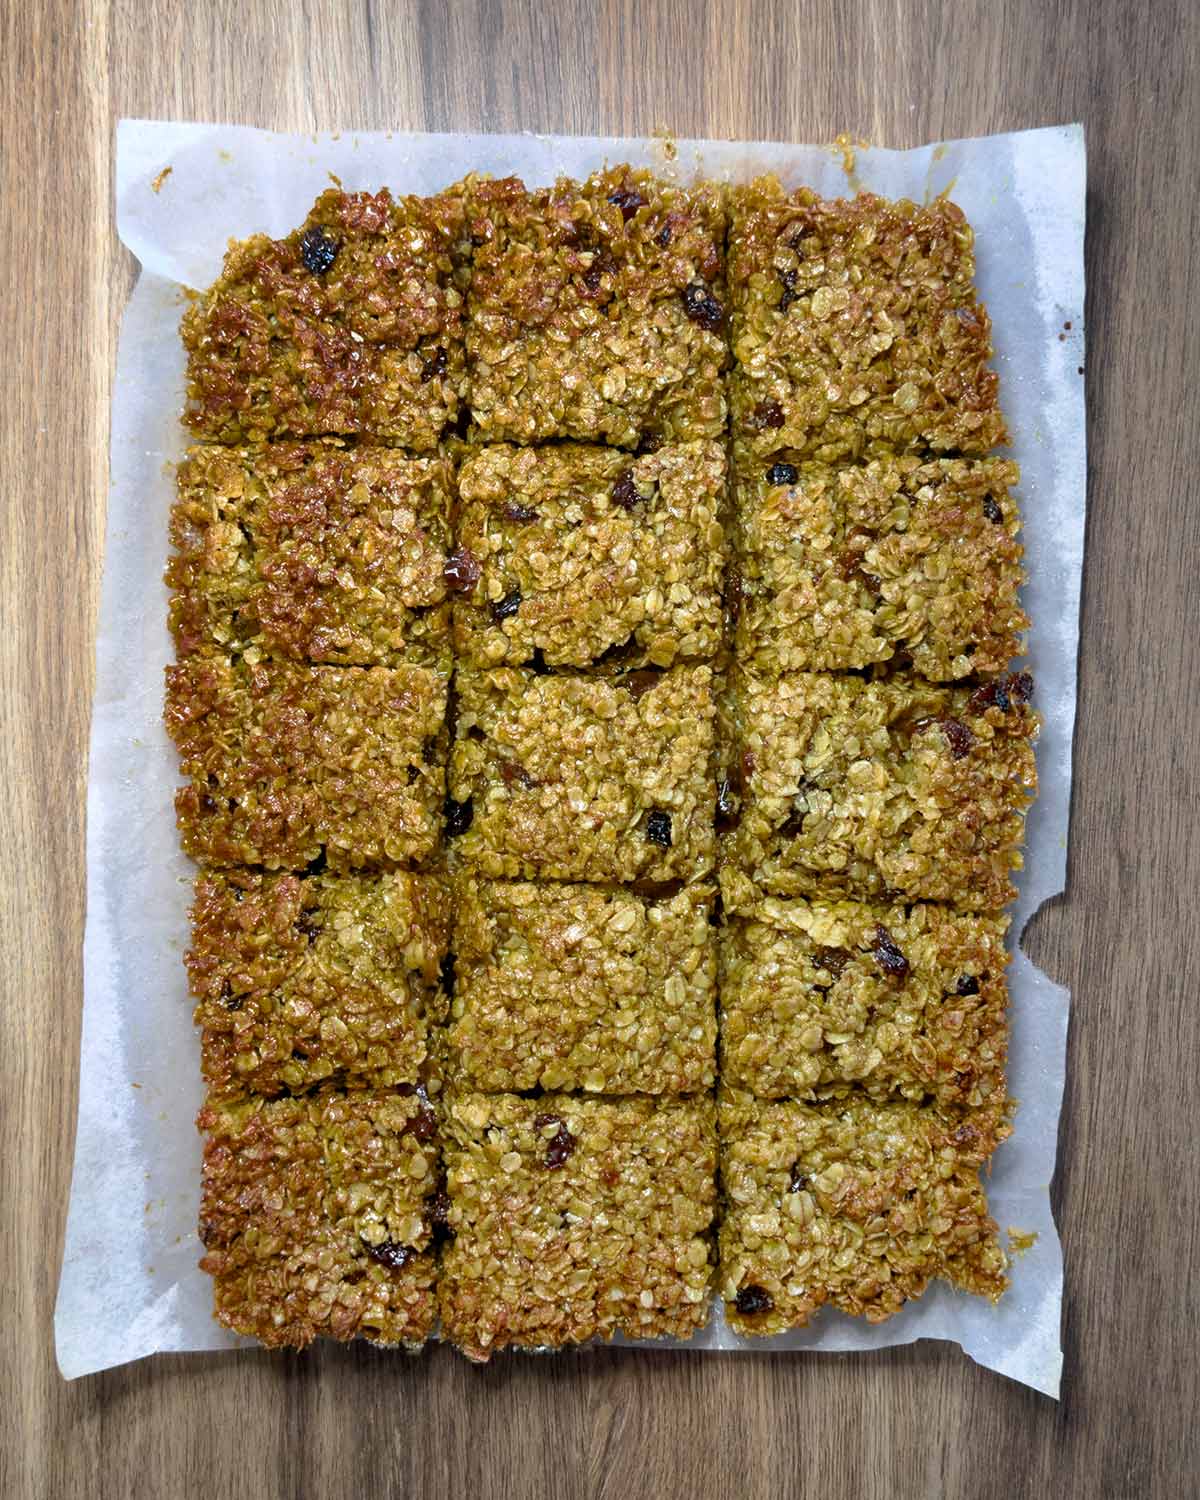 The cooked flapjacks cut into fifteen squares.